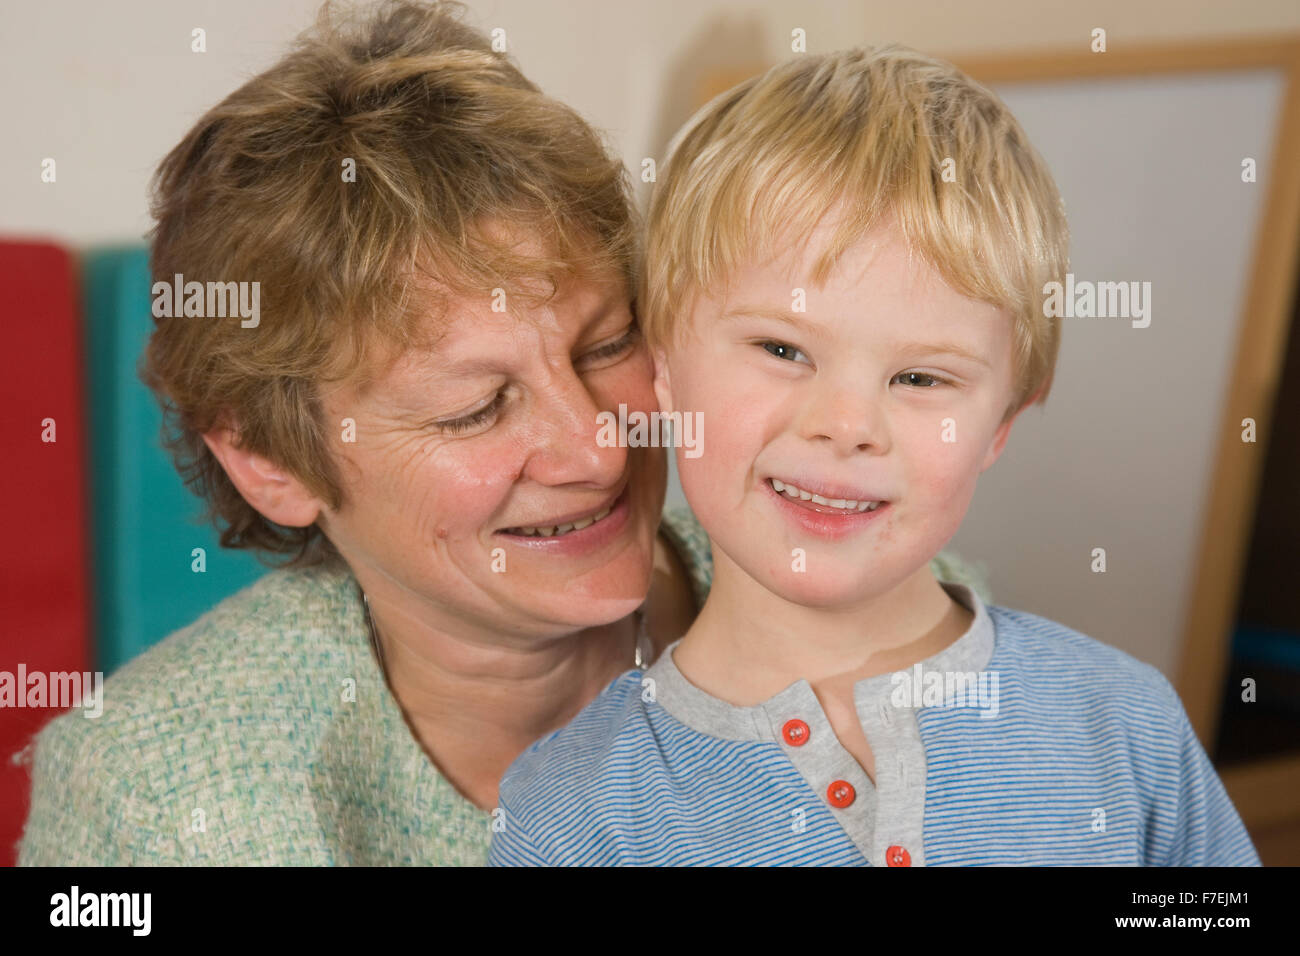 Mother with Down's Syndrome child, England, UK Stock Photo